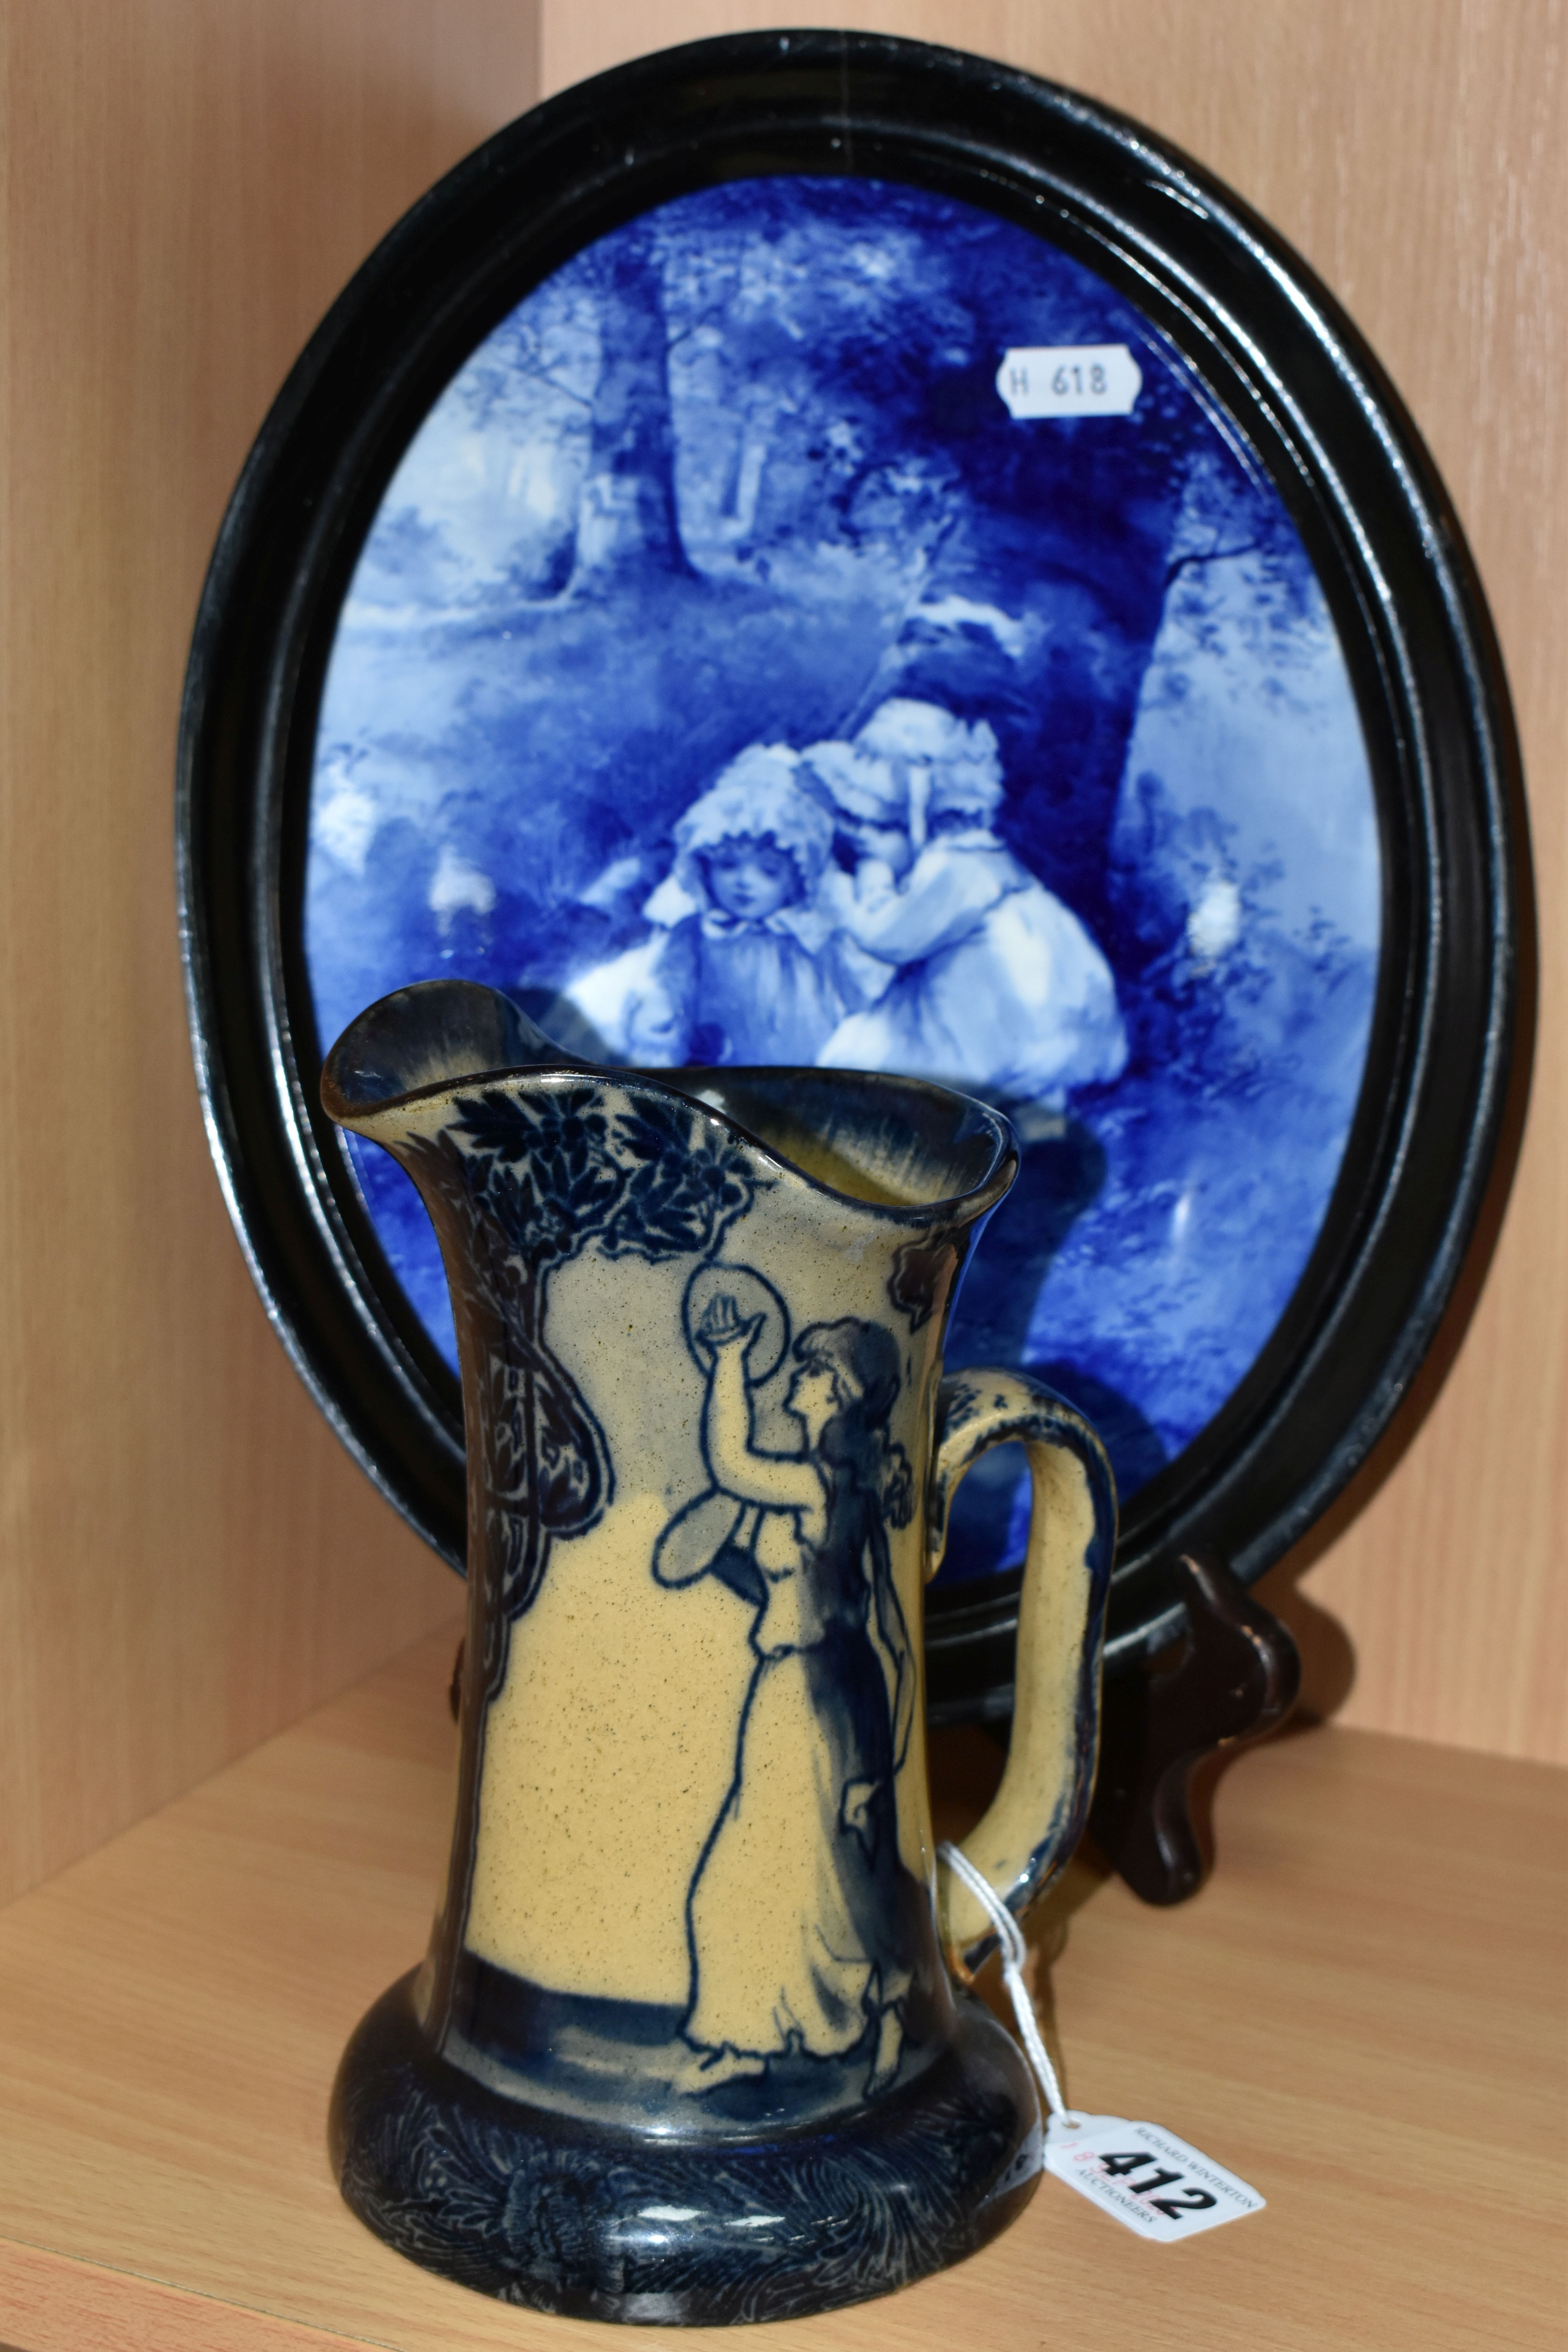 A ROYAL DOULTON BLUE CHILDREN PLAQUE AND A MORRISIAN WARE JUG, the framed oval plaque decorated with